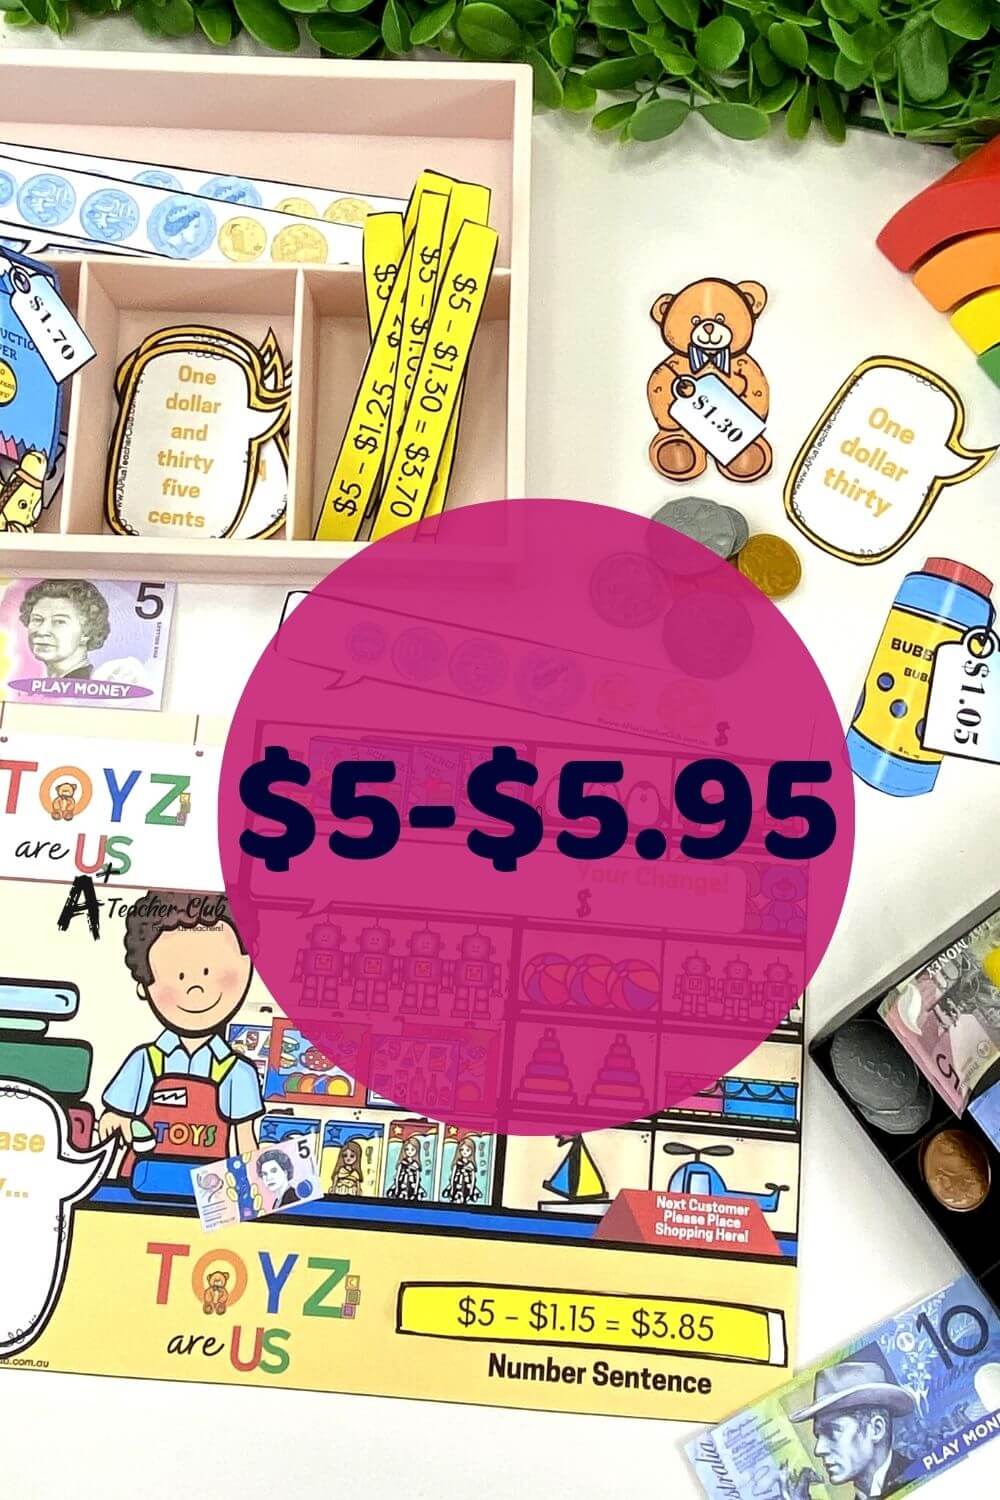 Christmas Maths Toy Shop Money & Change Game ($5-$5.95)